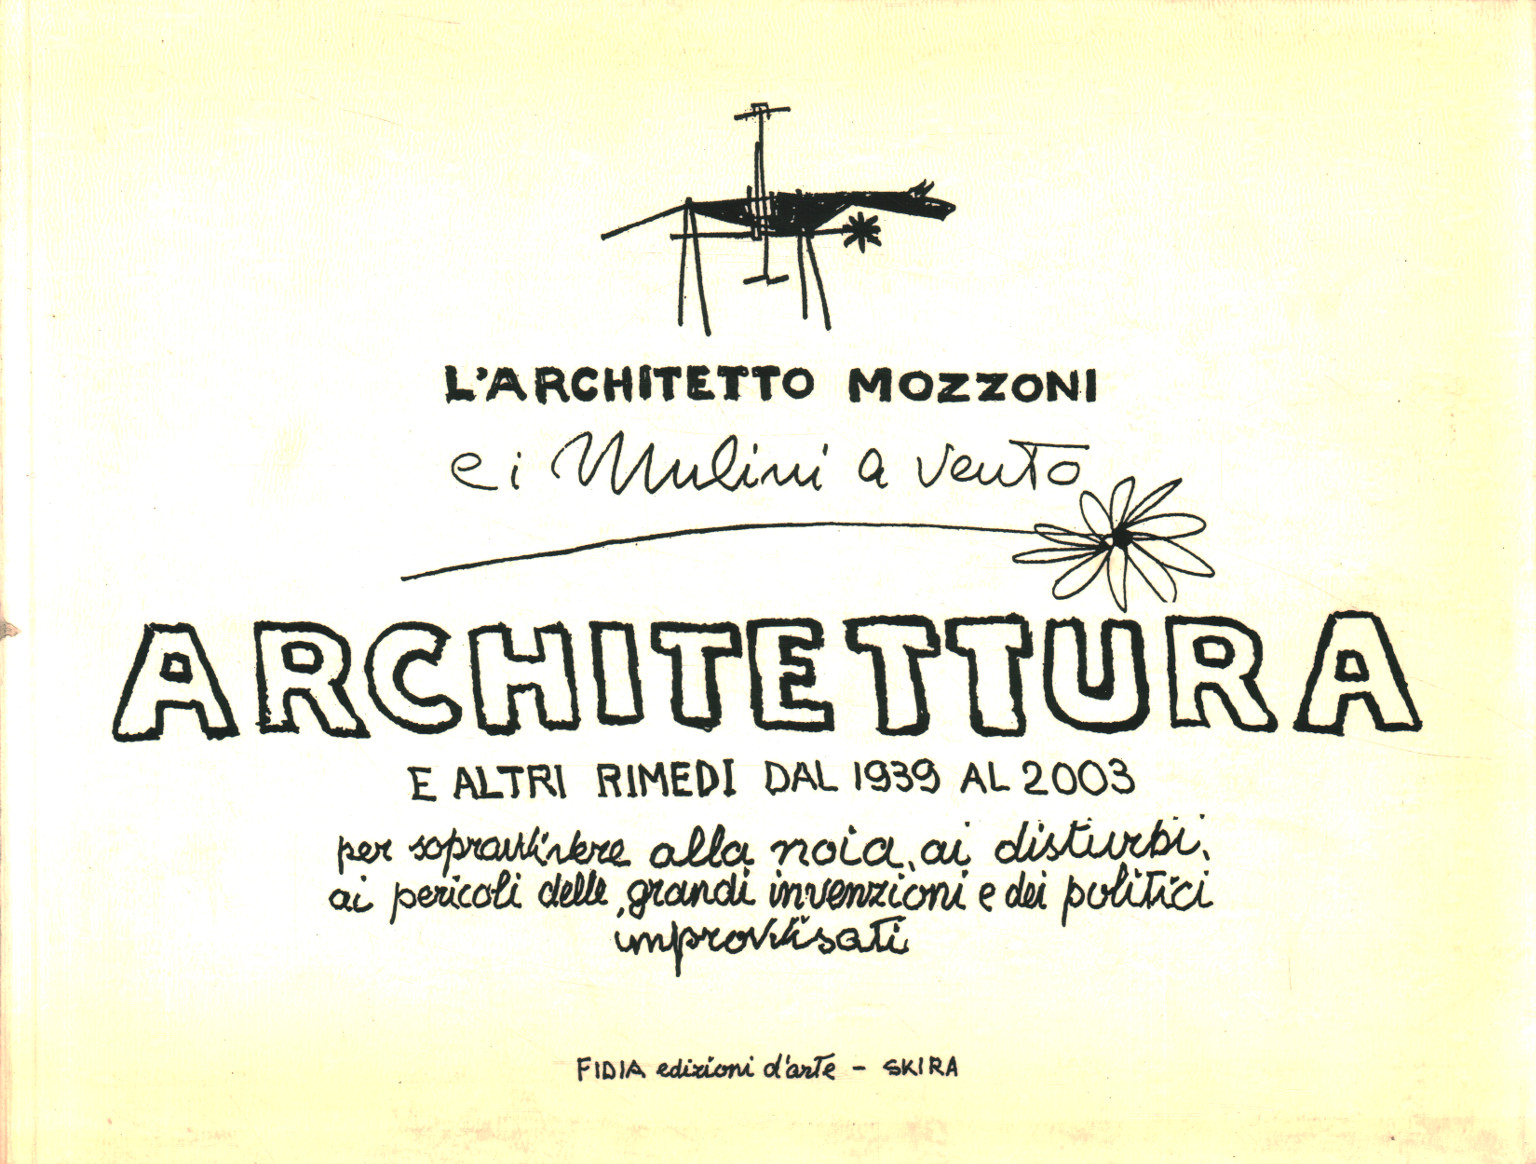 Books - Art - Architecture, The Architect Mozzoni and the mills